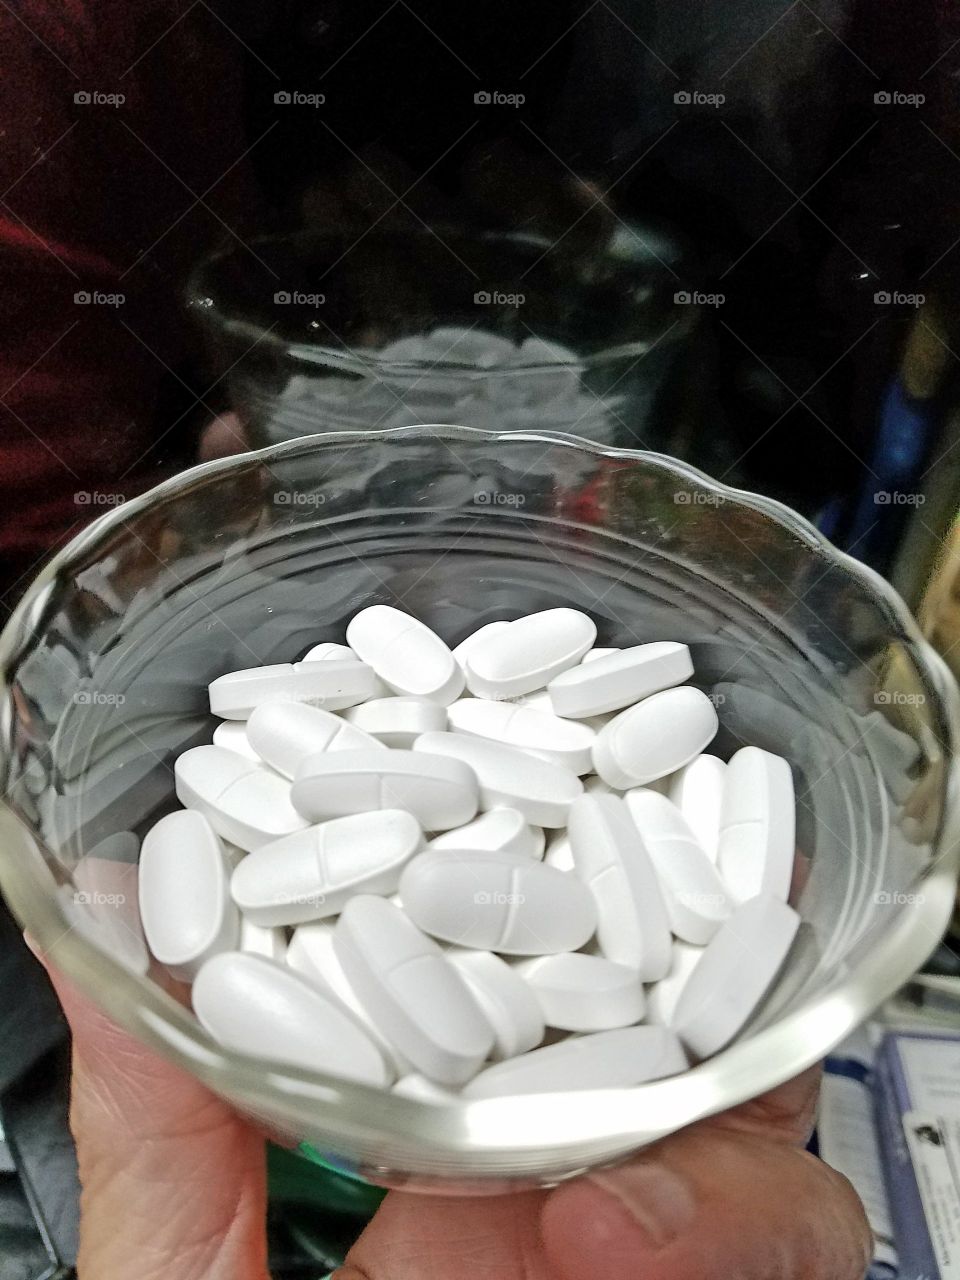 Holding dish of tablets with a reflection.